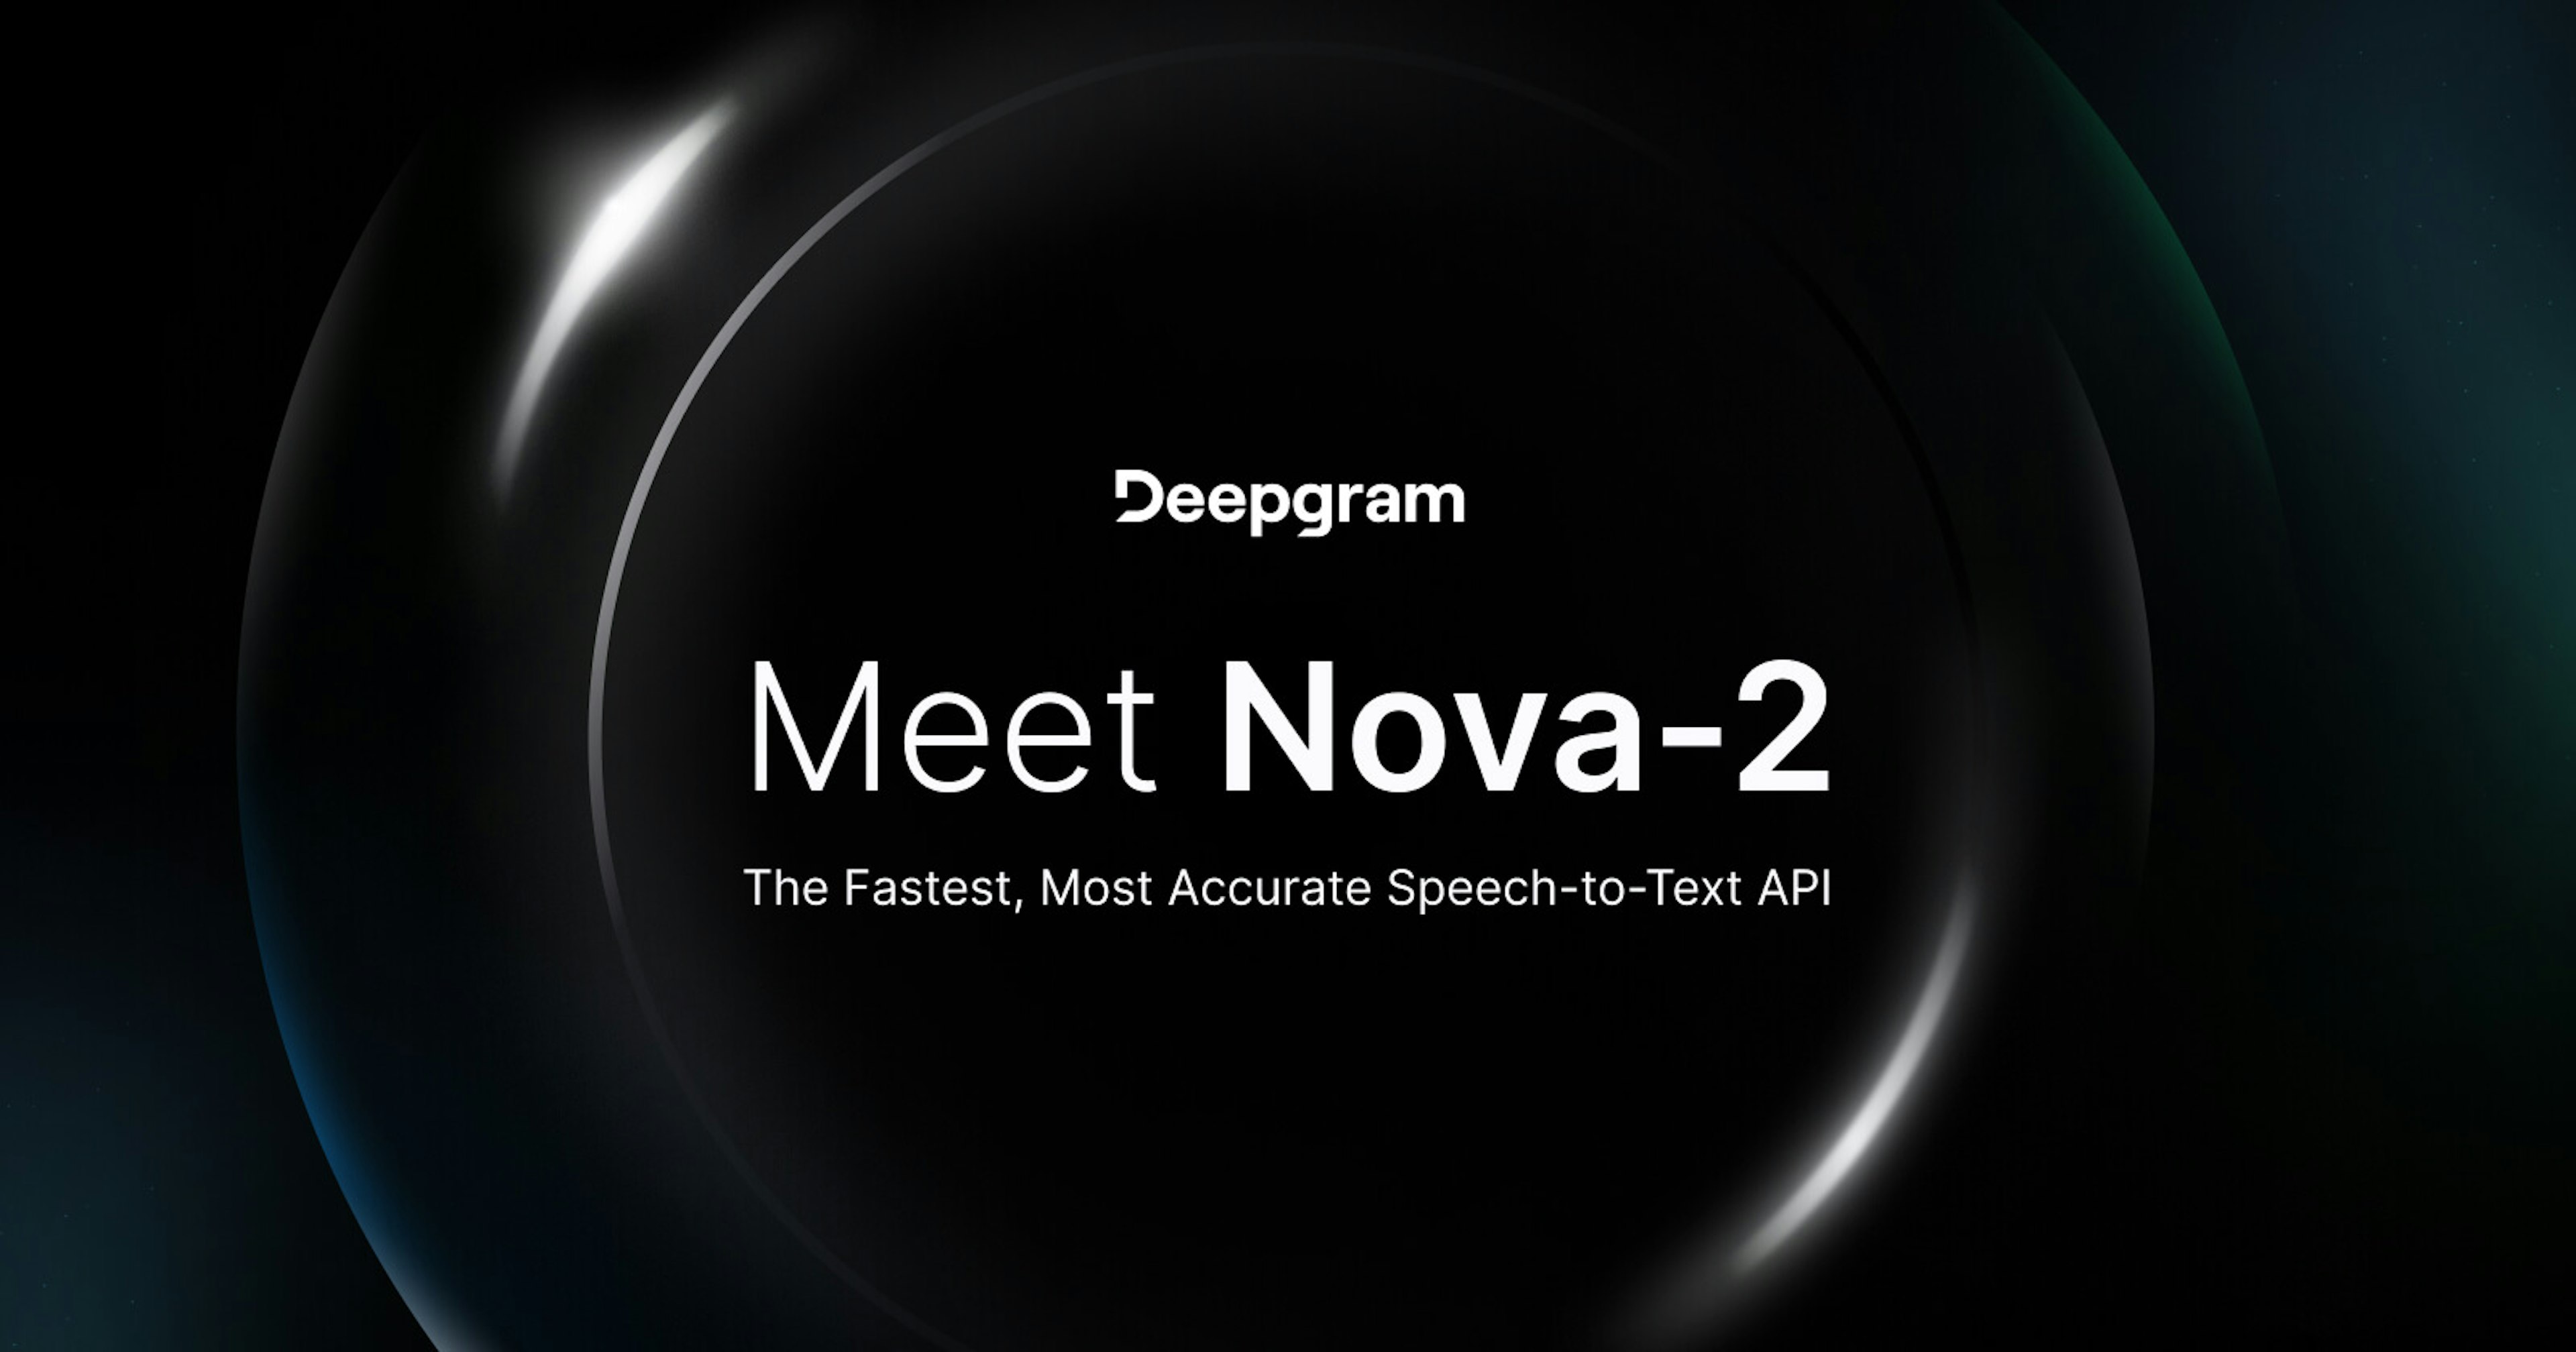 Introducing Nova-2: The Fastest, Most Accurate Speech-to-Text API